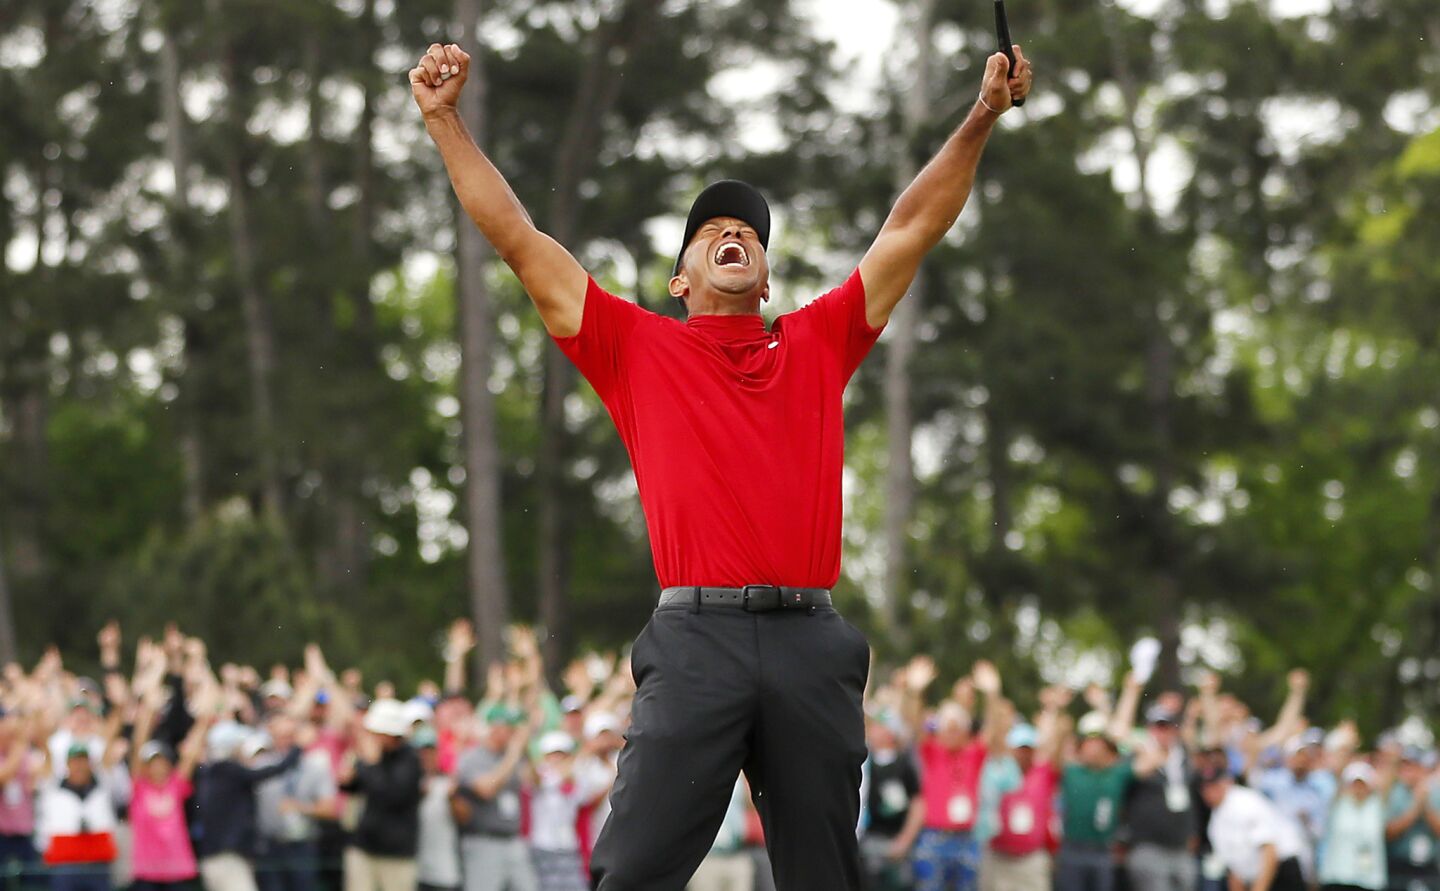 Tiger Woods celebrates after sinking his putt to win during the final round of the Masters at Augusta National Golf Club on April 14 in Augusta, Ga.